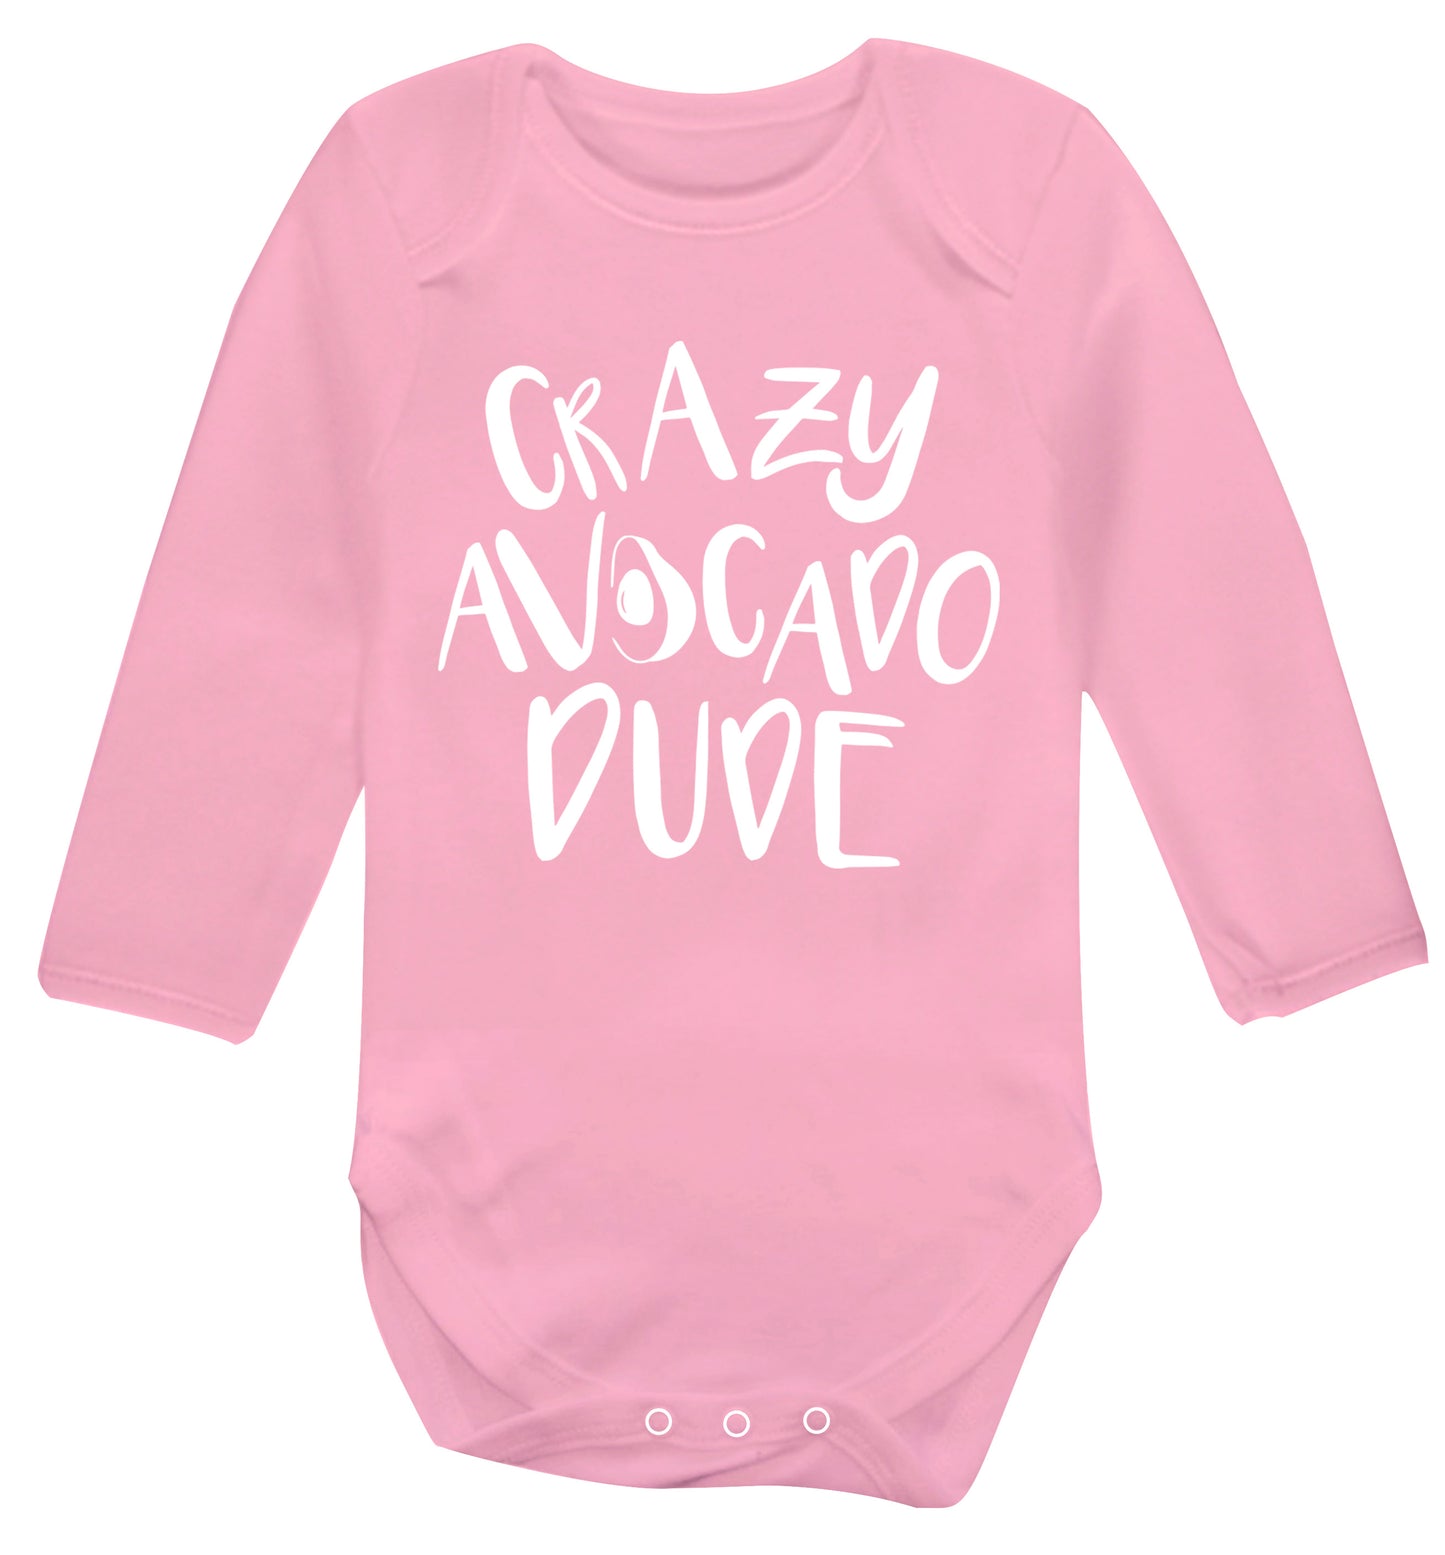 Crazy avocado dude Baby Vest long sleeved pale pink 6-12 months